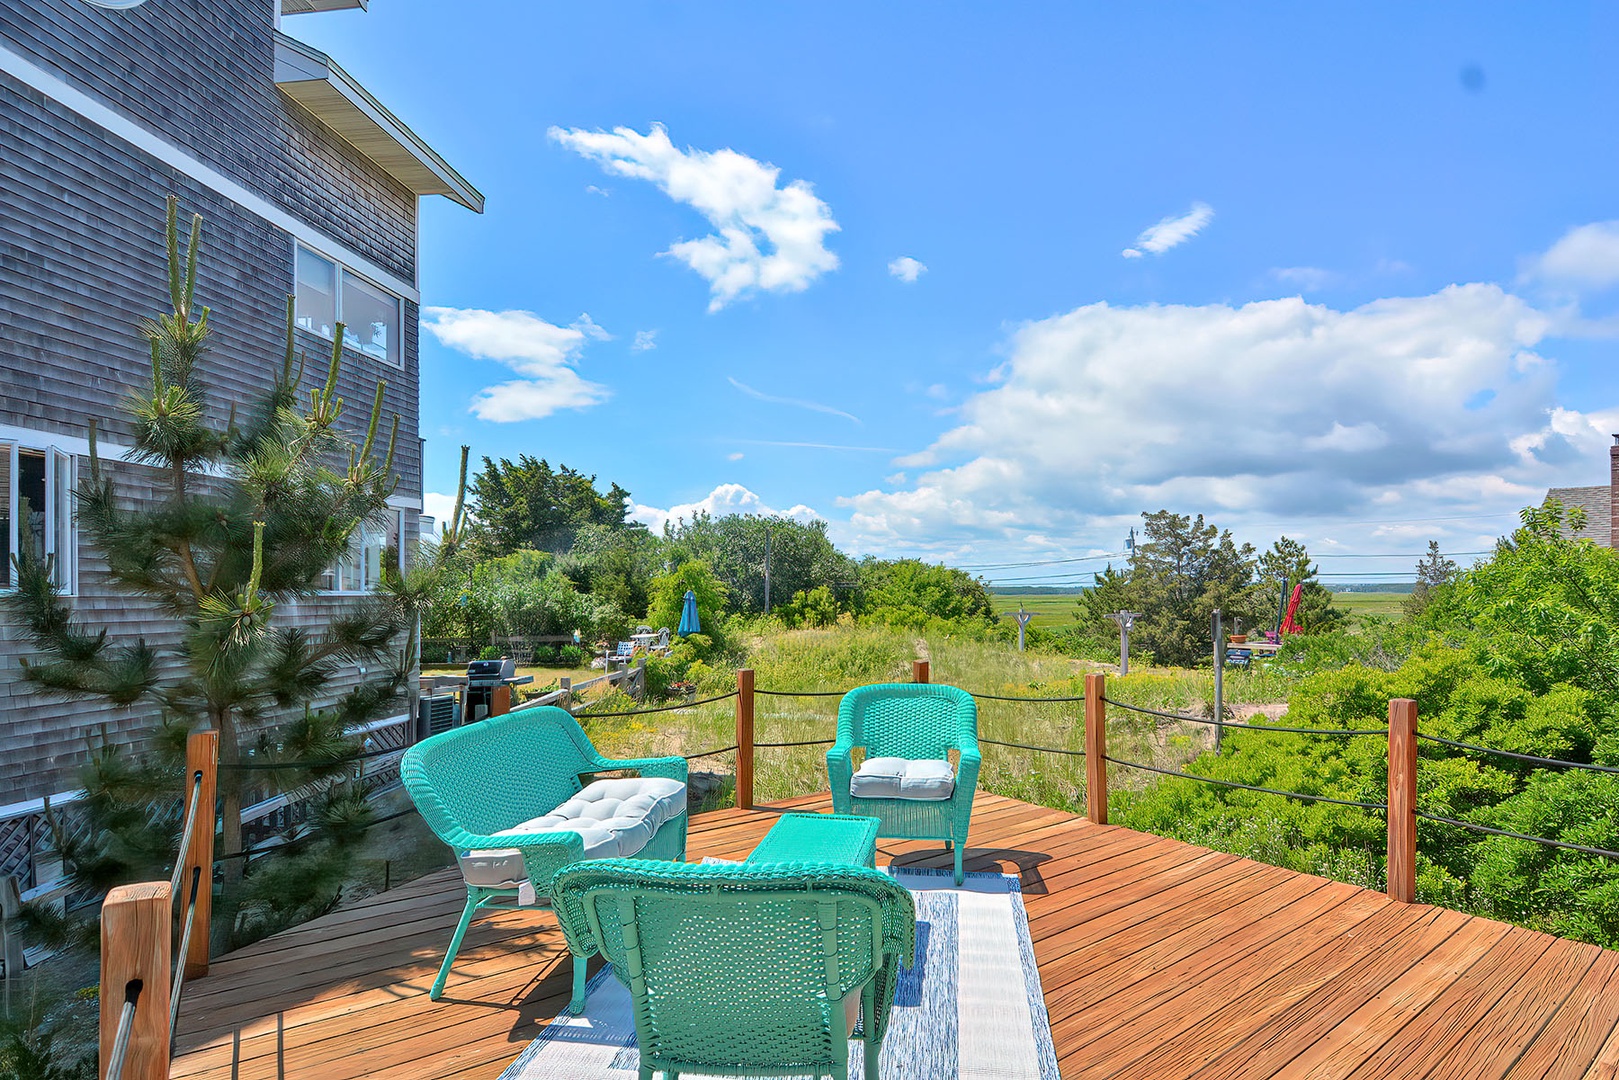 From this deck, there are views of the marsh.